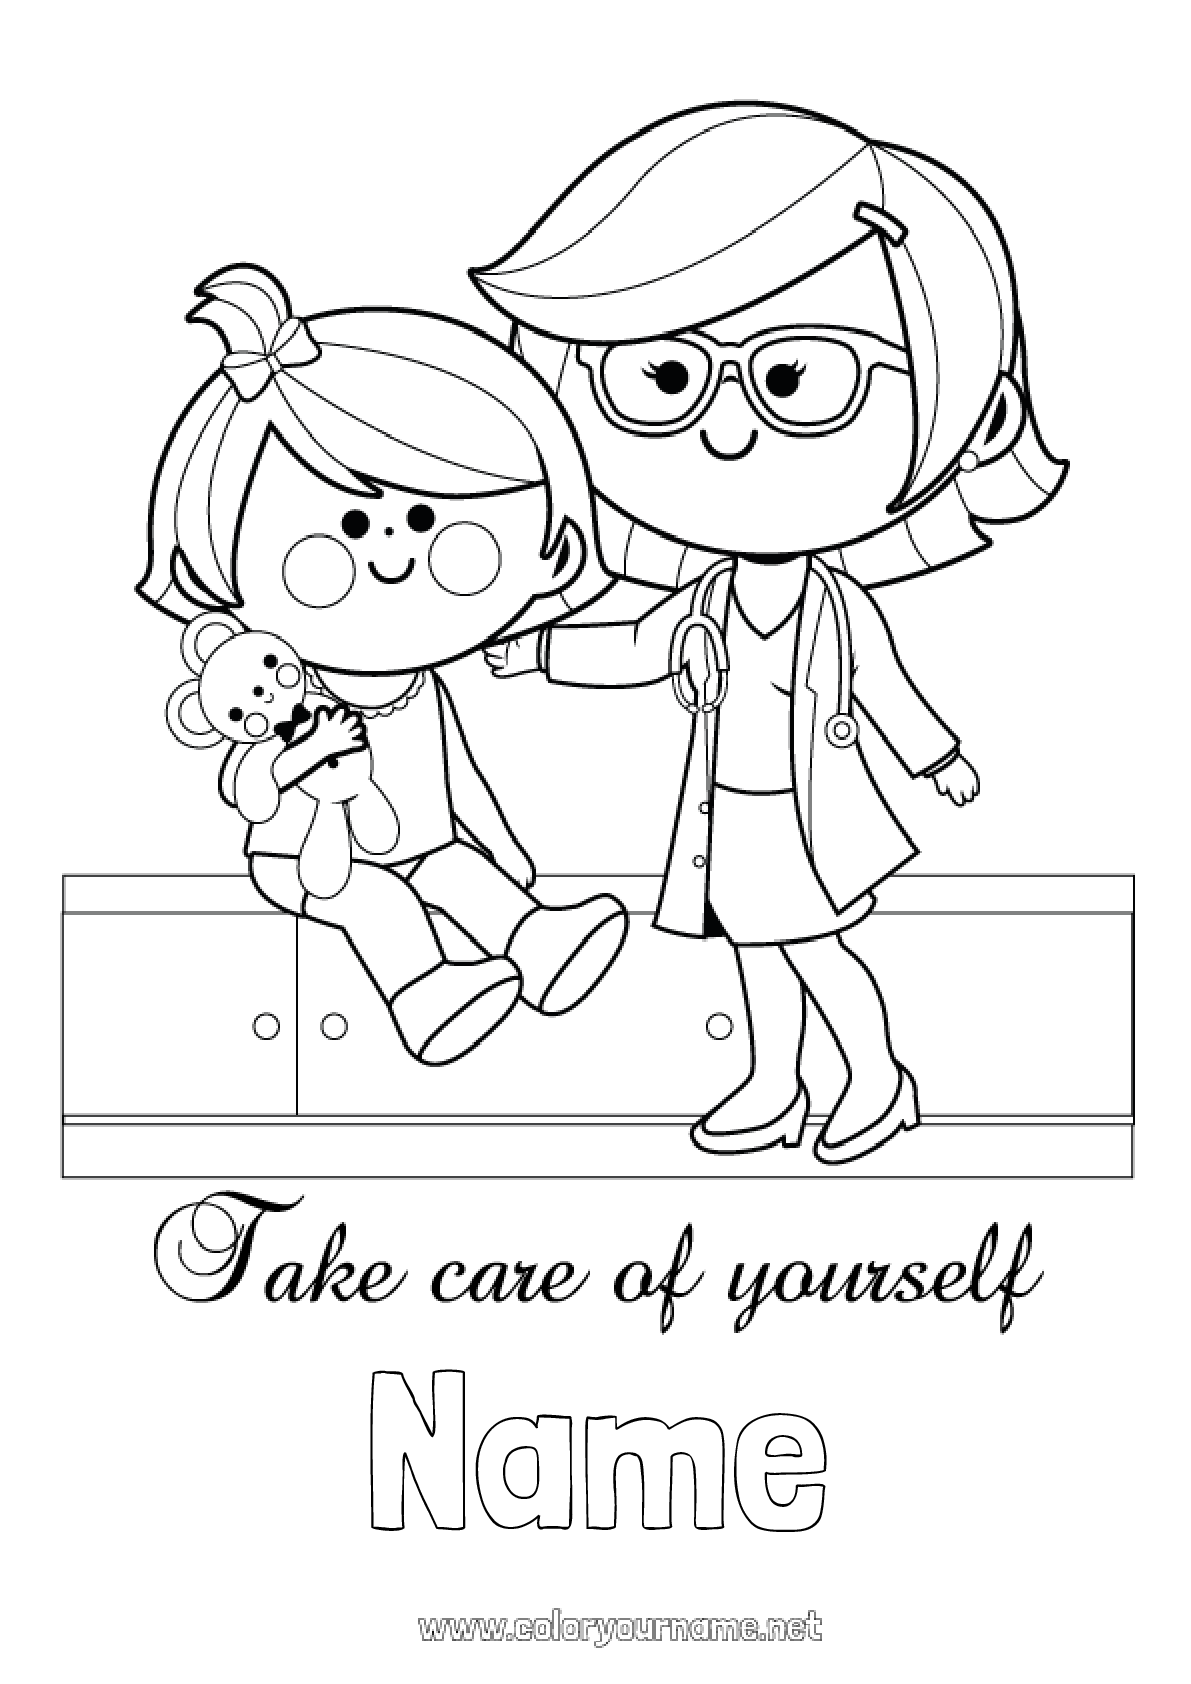 Coloring page No.301 - Sick Girl Games and toys